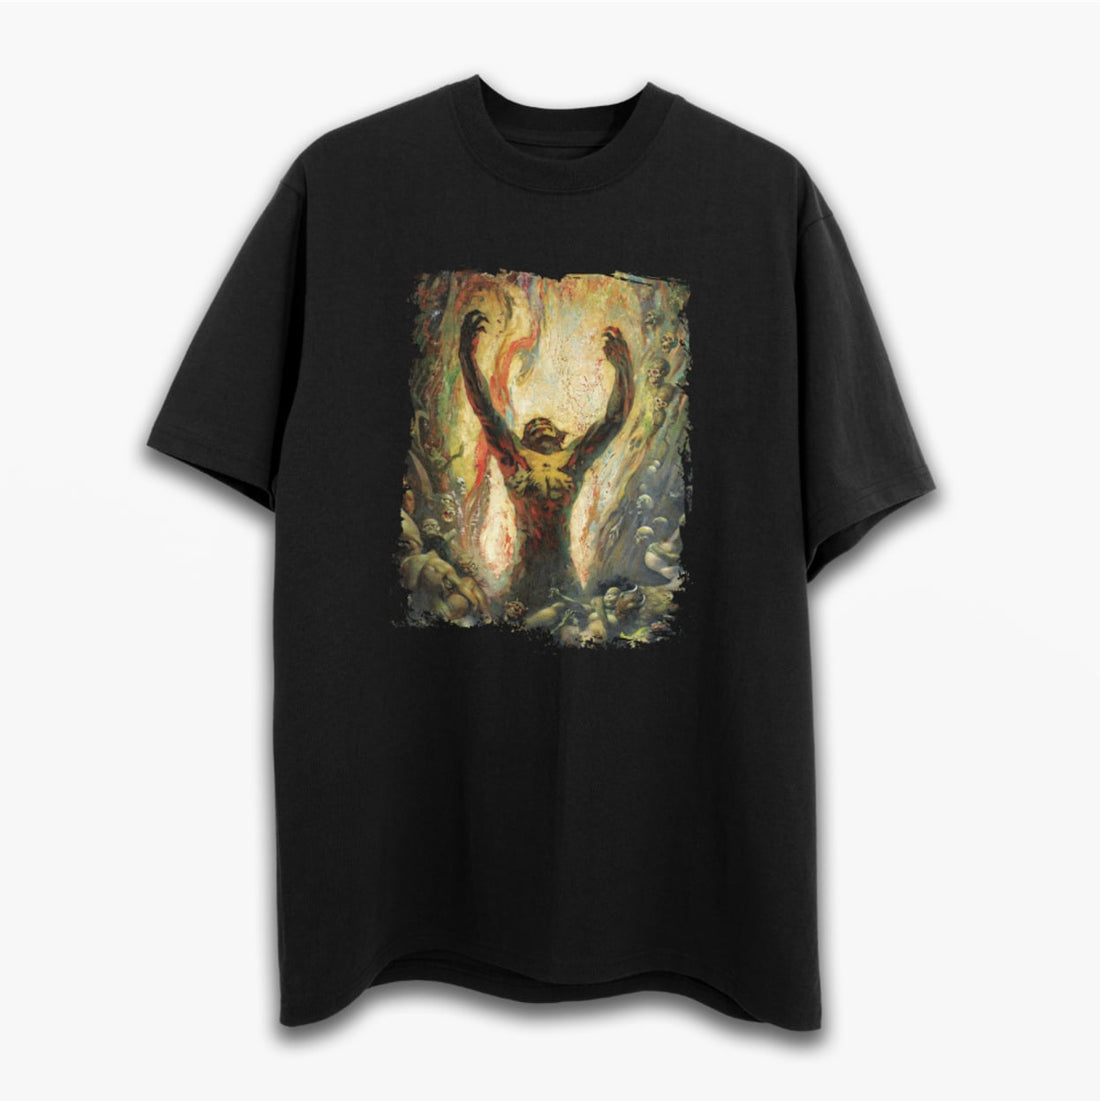 Reign of Wizardry T-Shirt